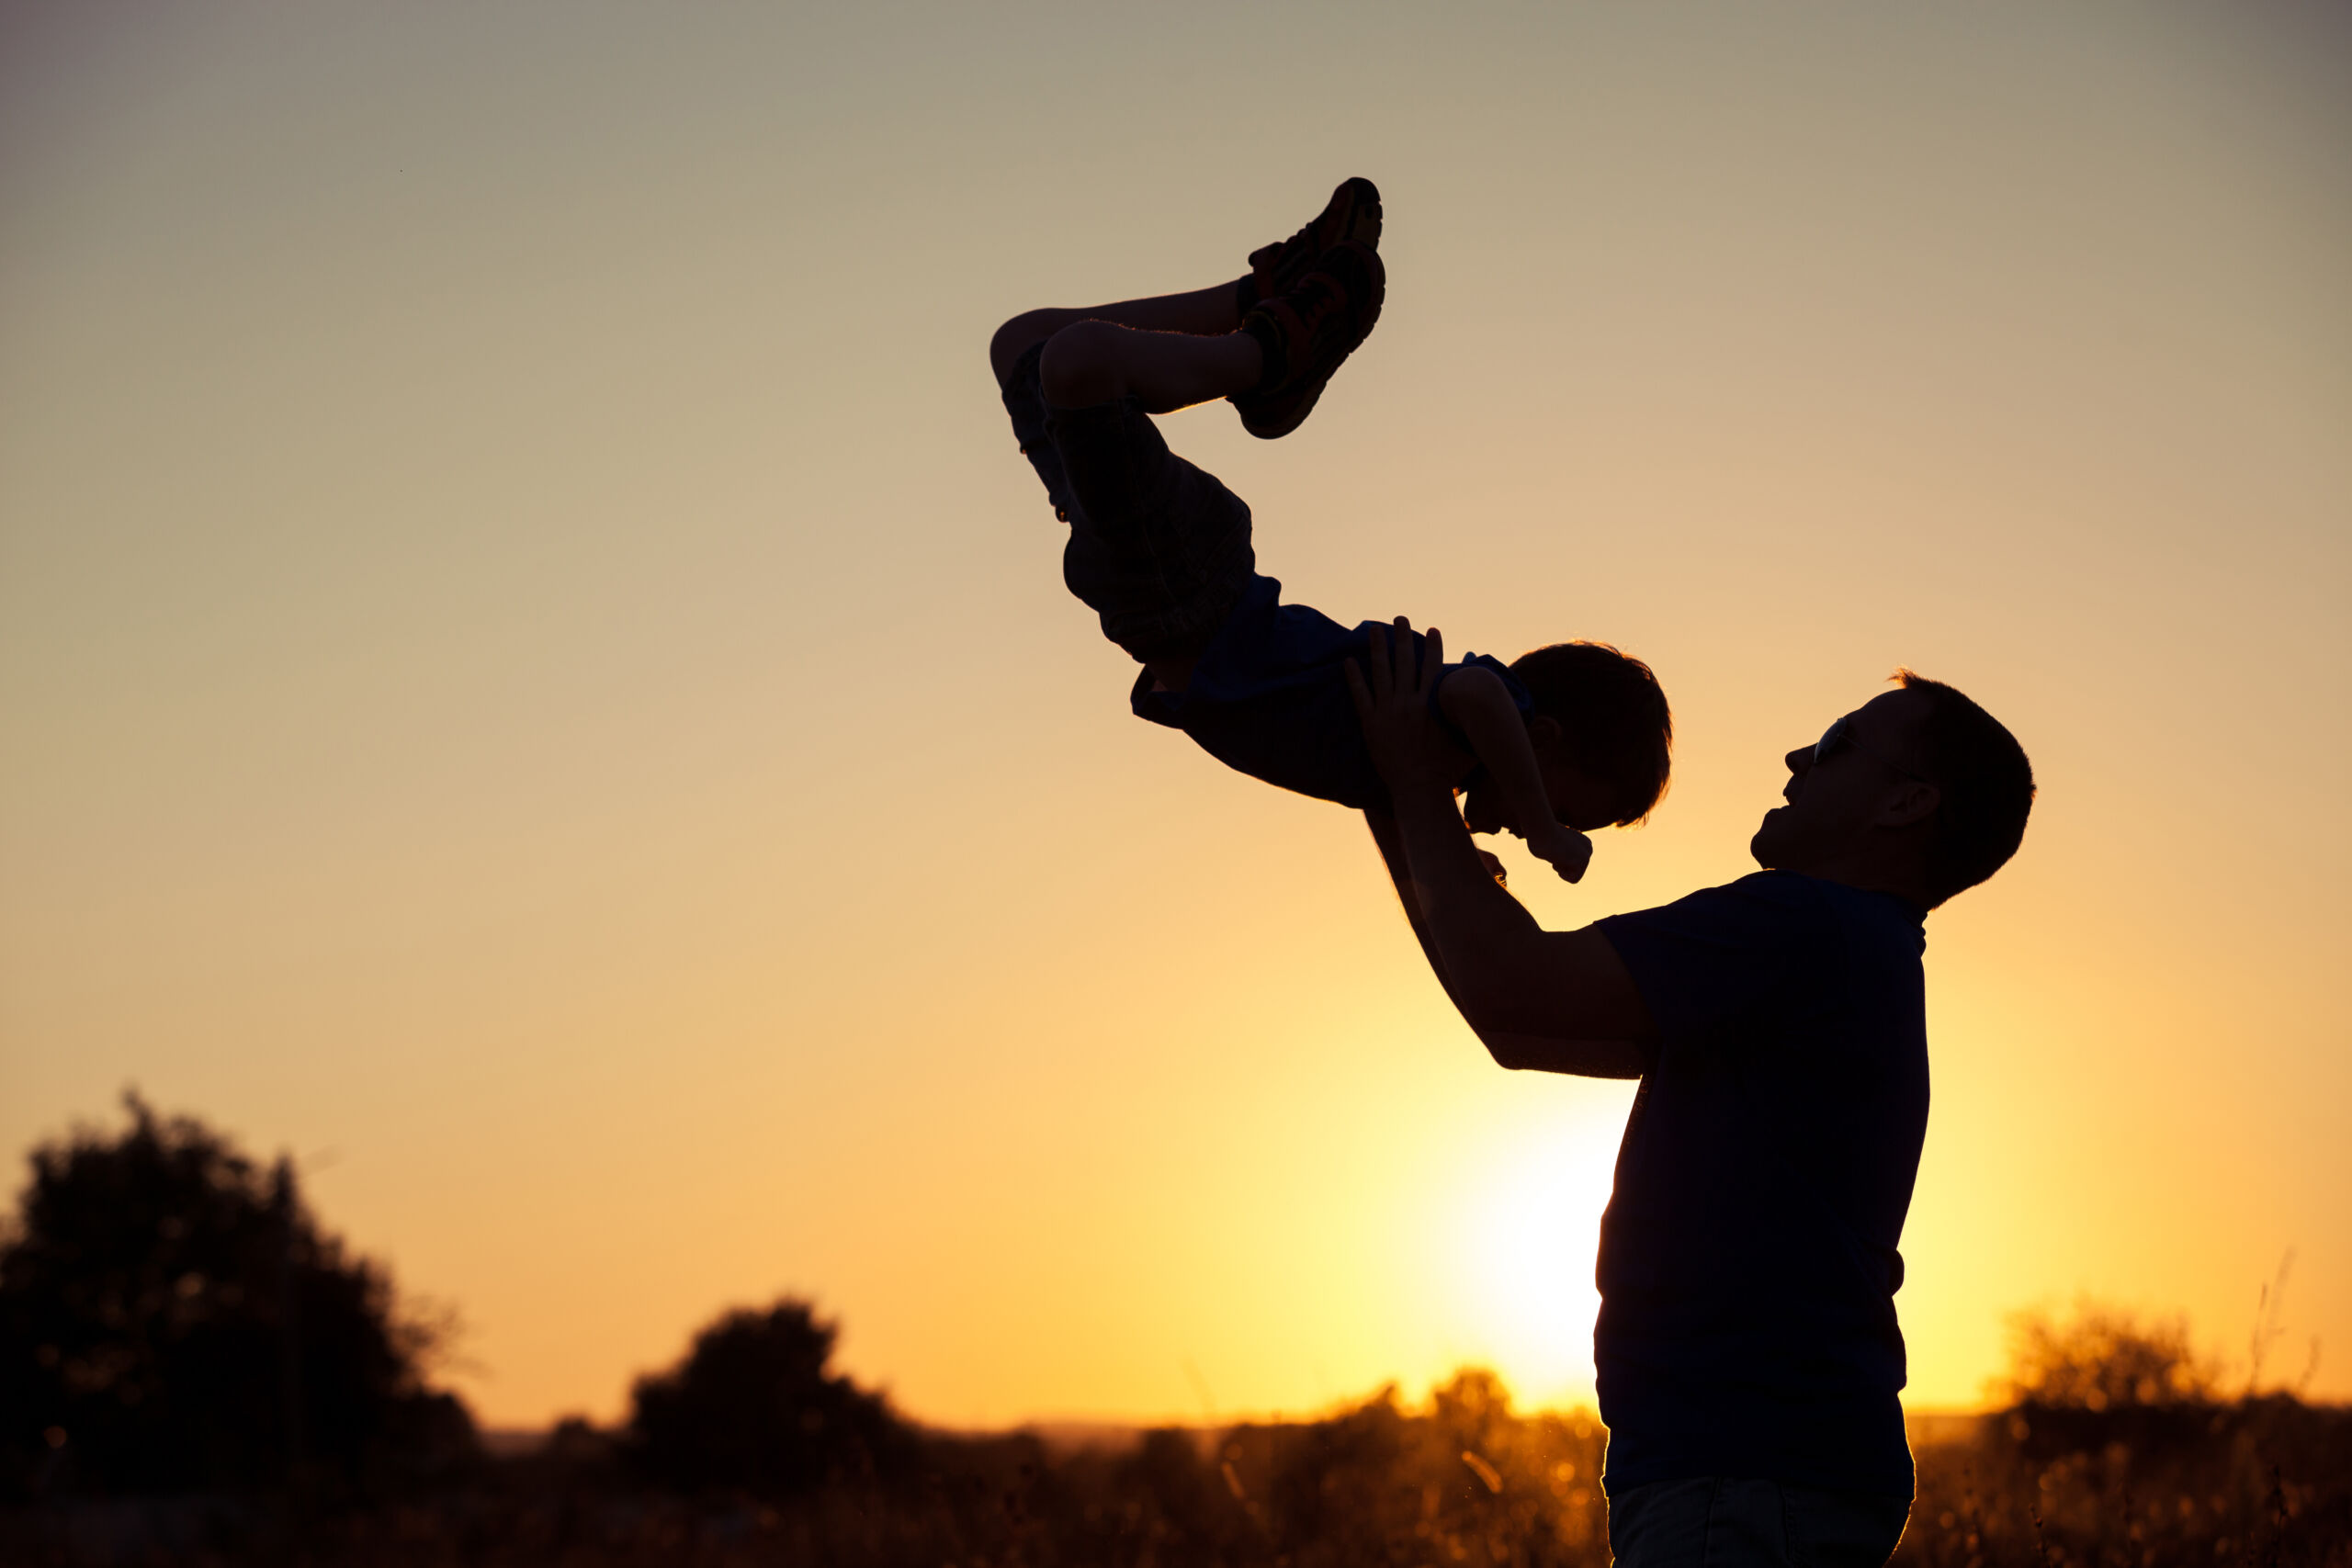 Silhouette of a dad lifting a child in the air with a sunset in the background.